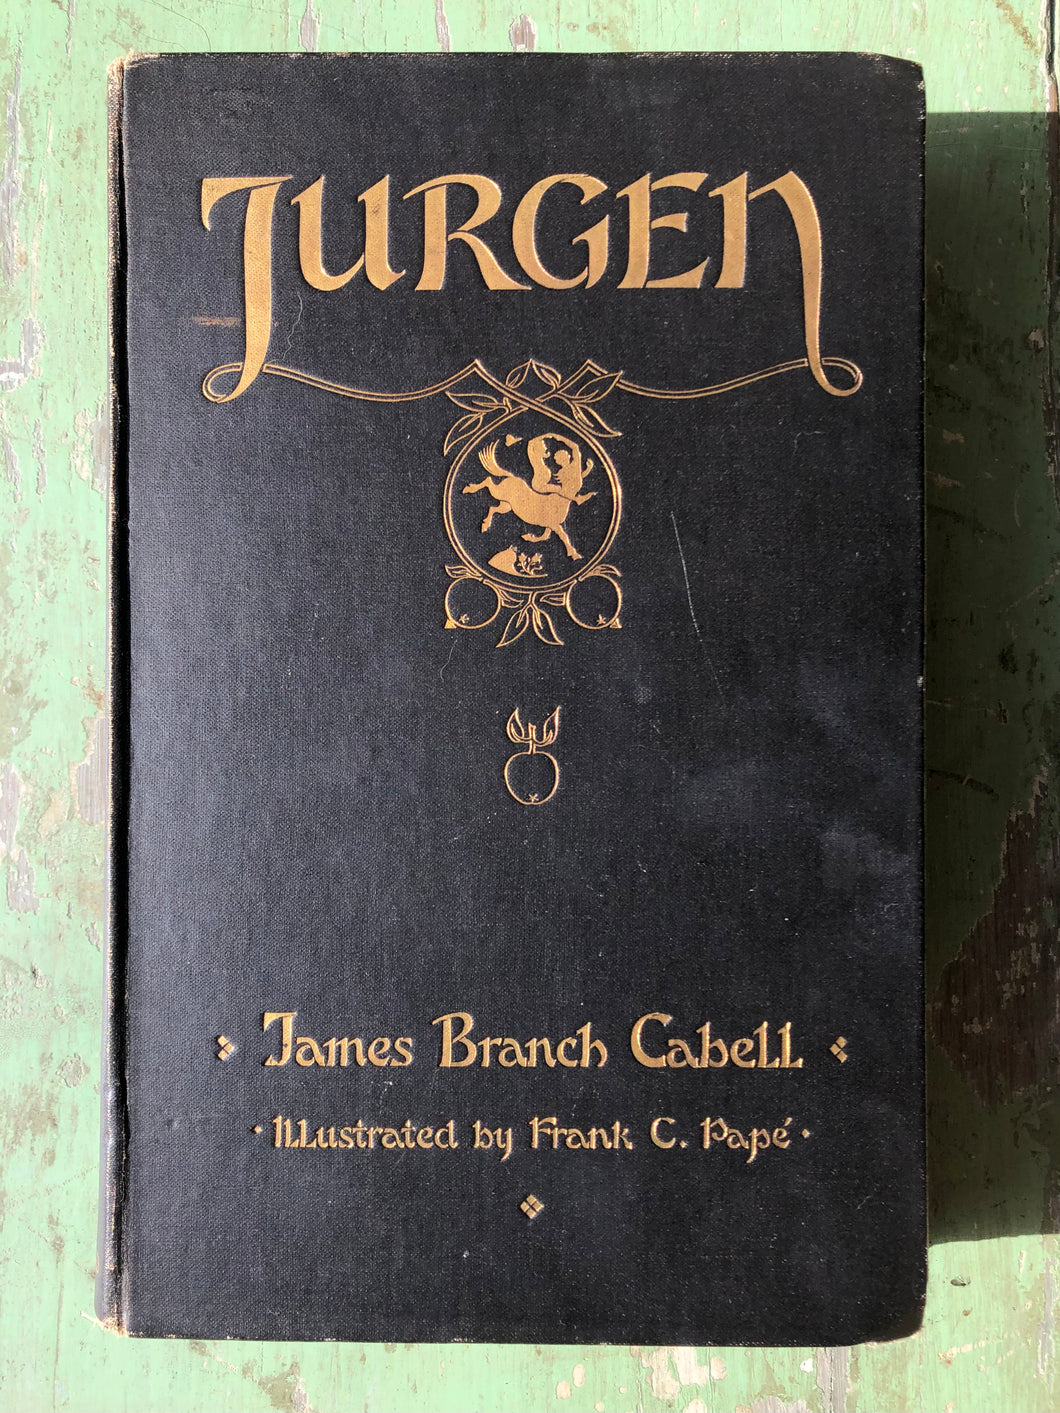 Jurgen: A Comedy of Justice. by James Branch Cabell with illustrations and decorations by Frank C. Pape